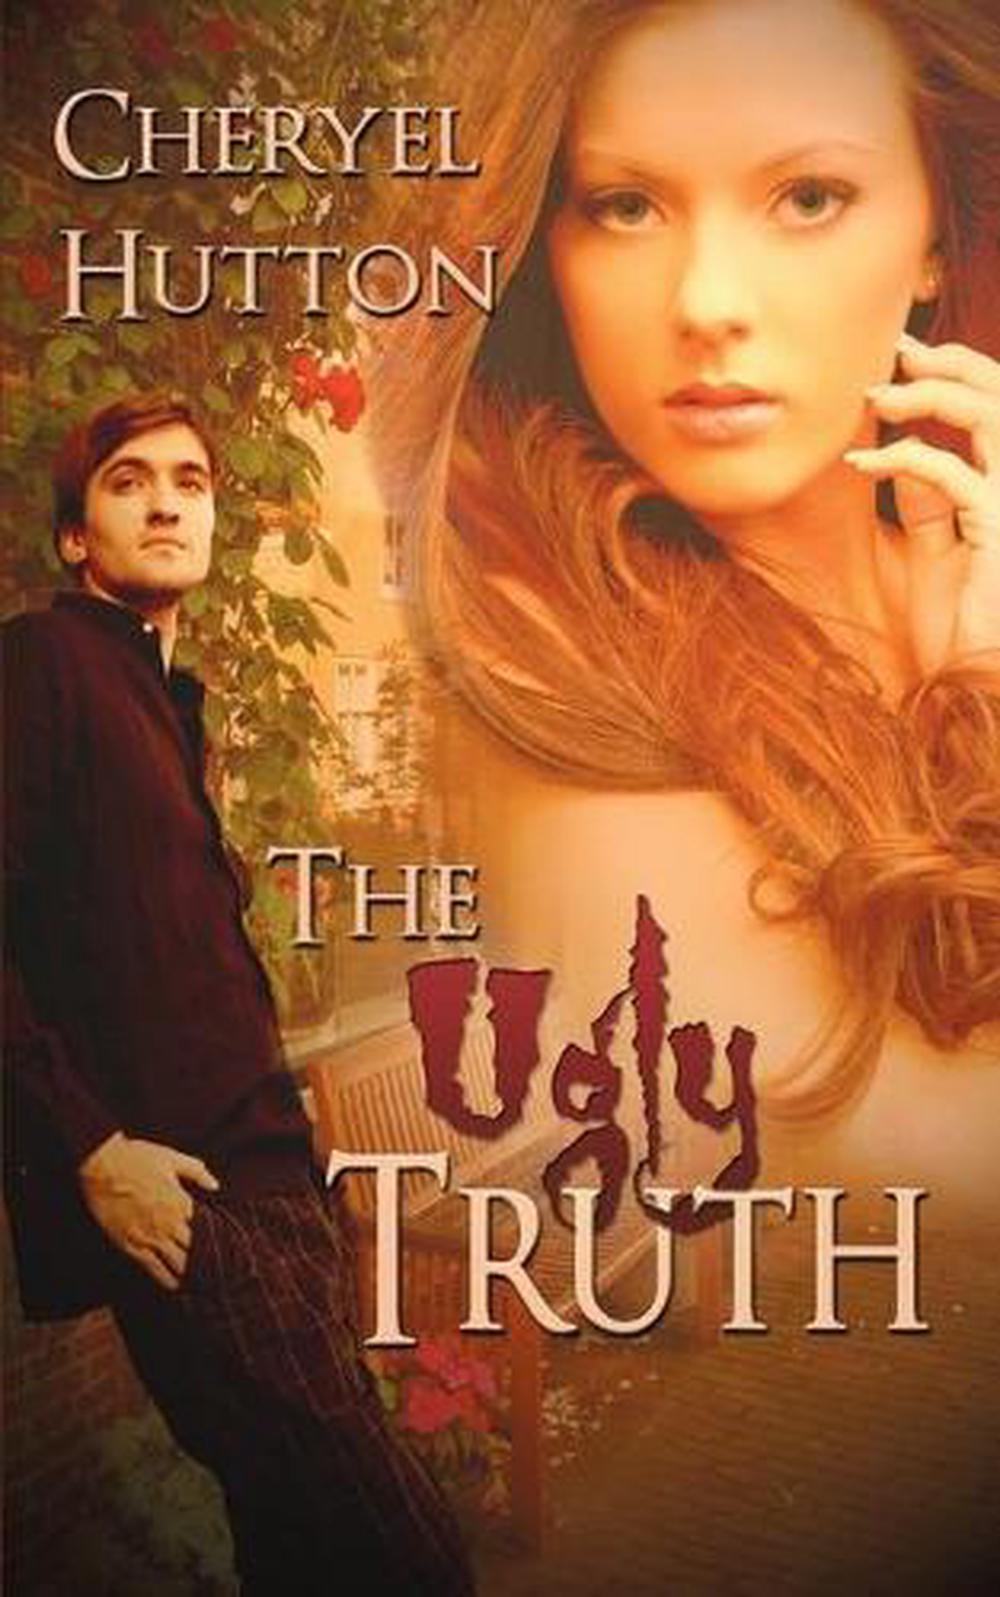 The Ugly Truth By Cheryel Hutton Paperback Book Free Shipping Ebay 4670